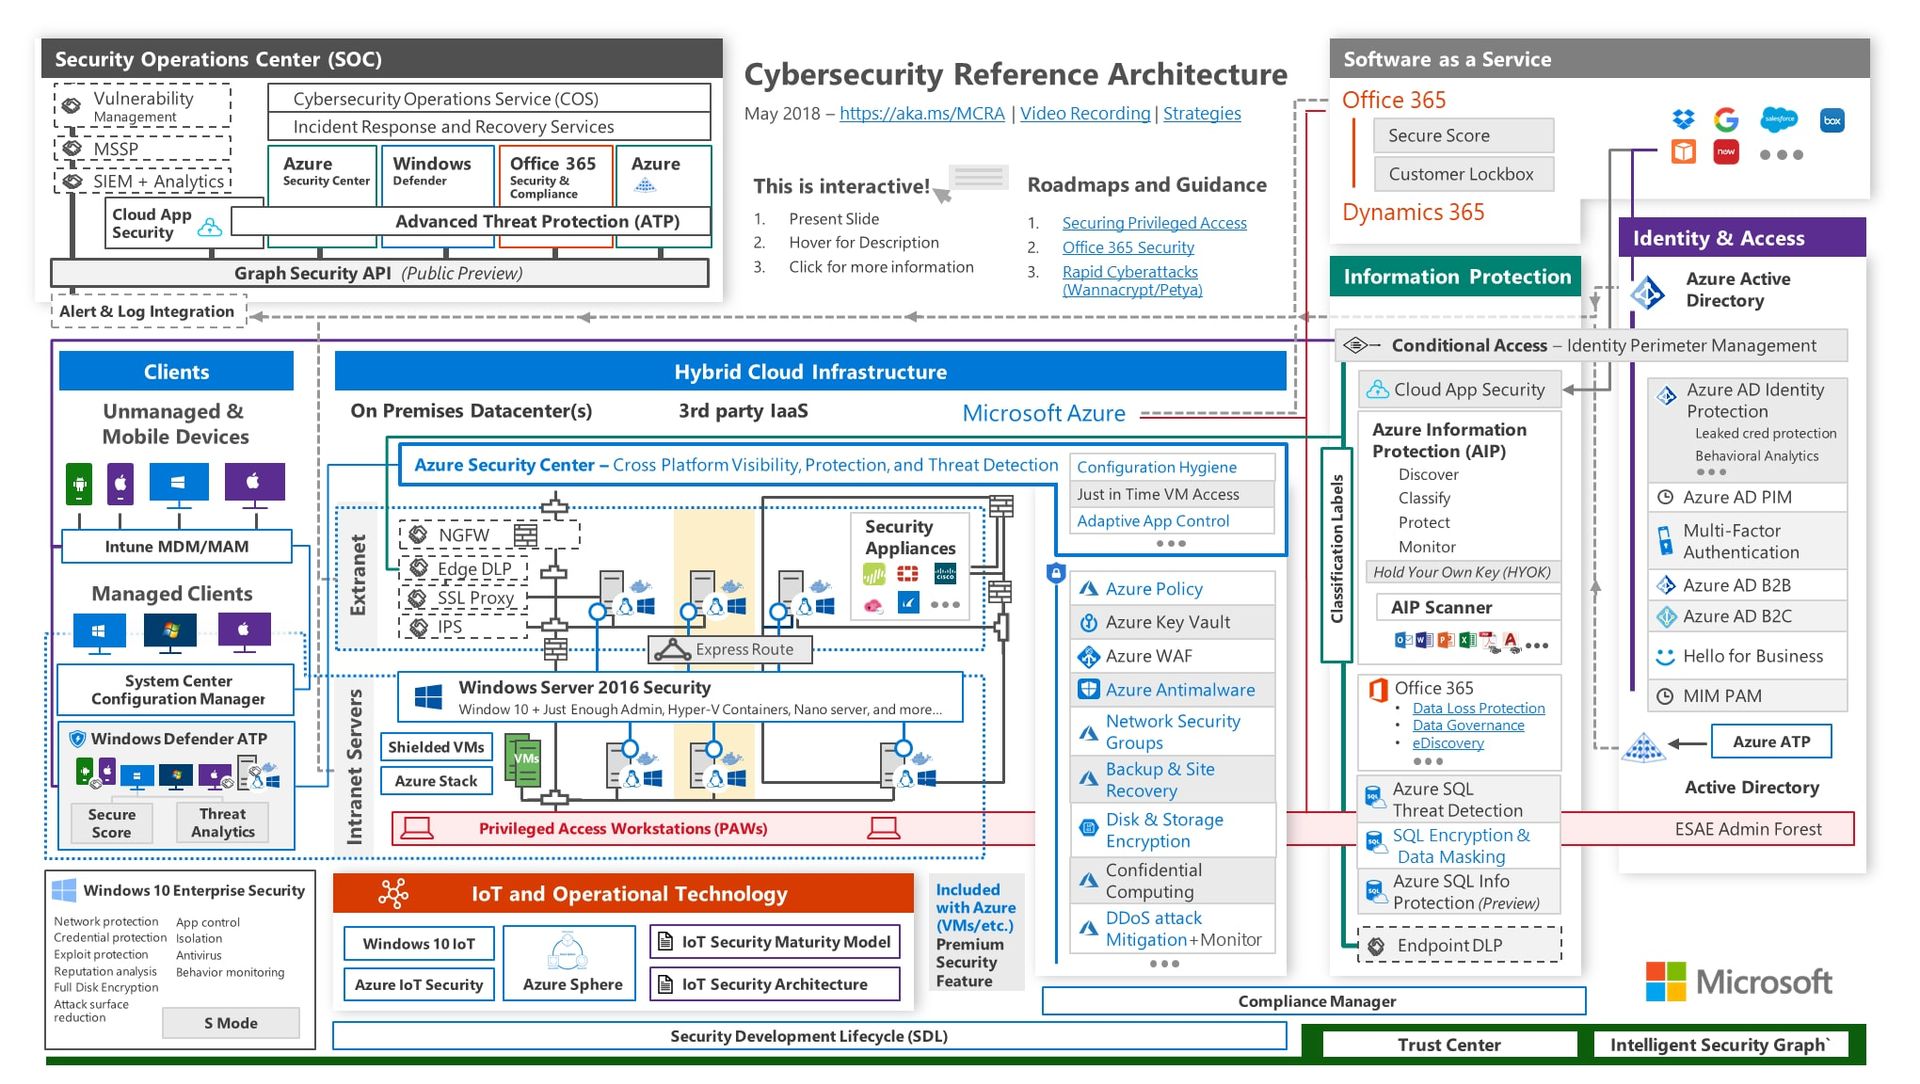 Microsoft’s cybersecurity reference architecture